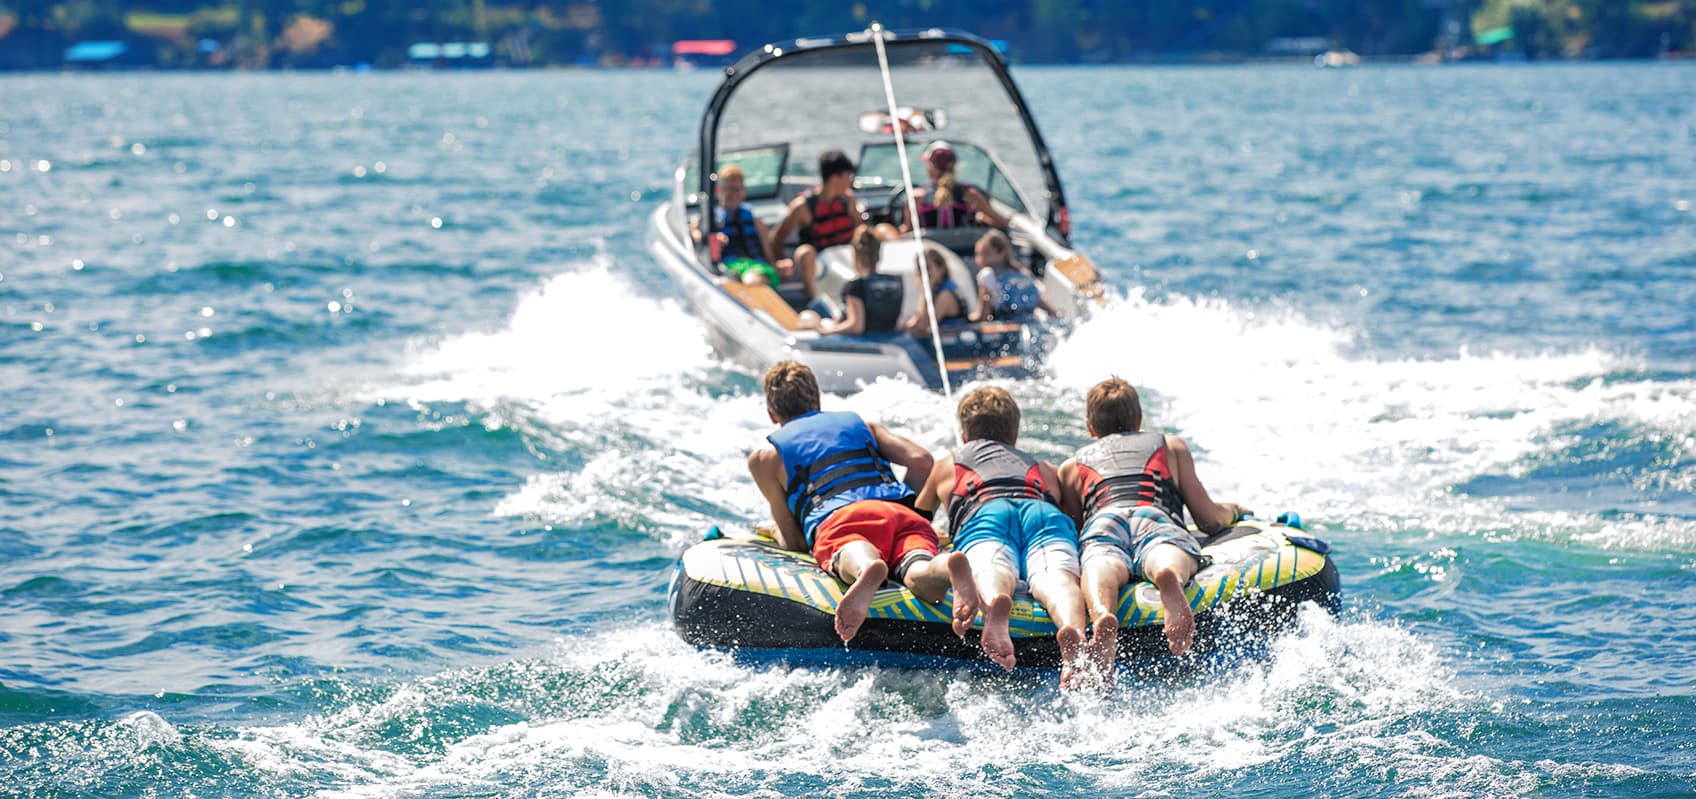 three boys enjoying riding a tube pulled by a boat on lakewater